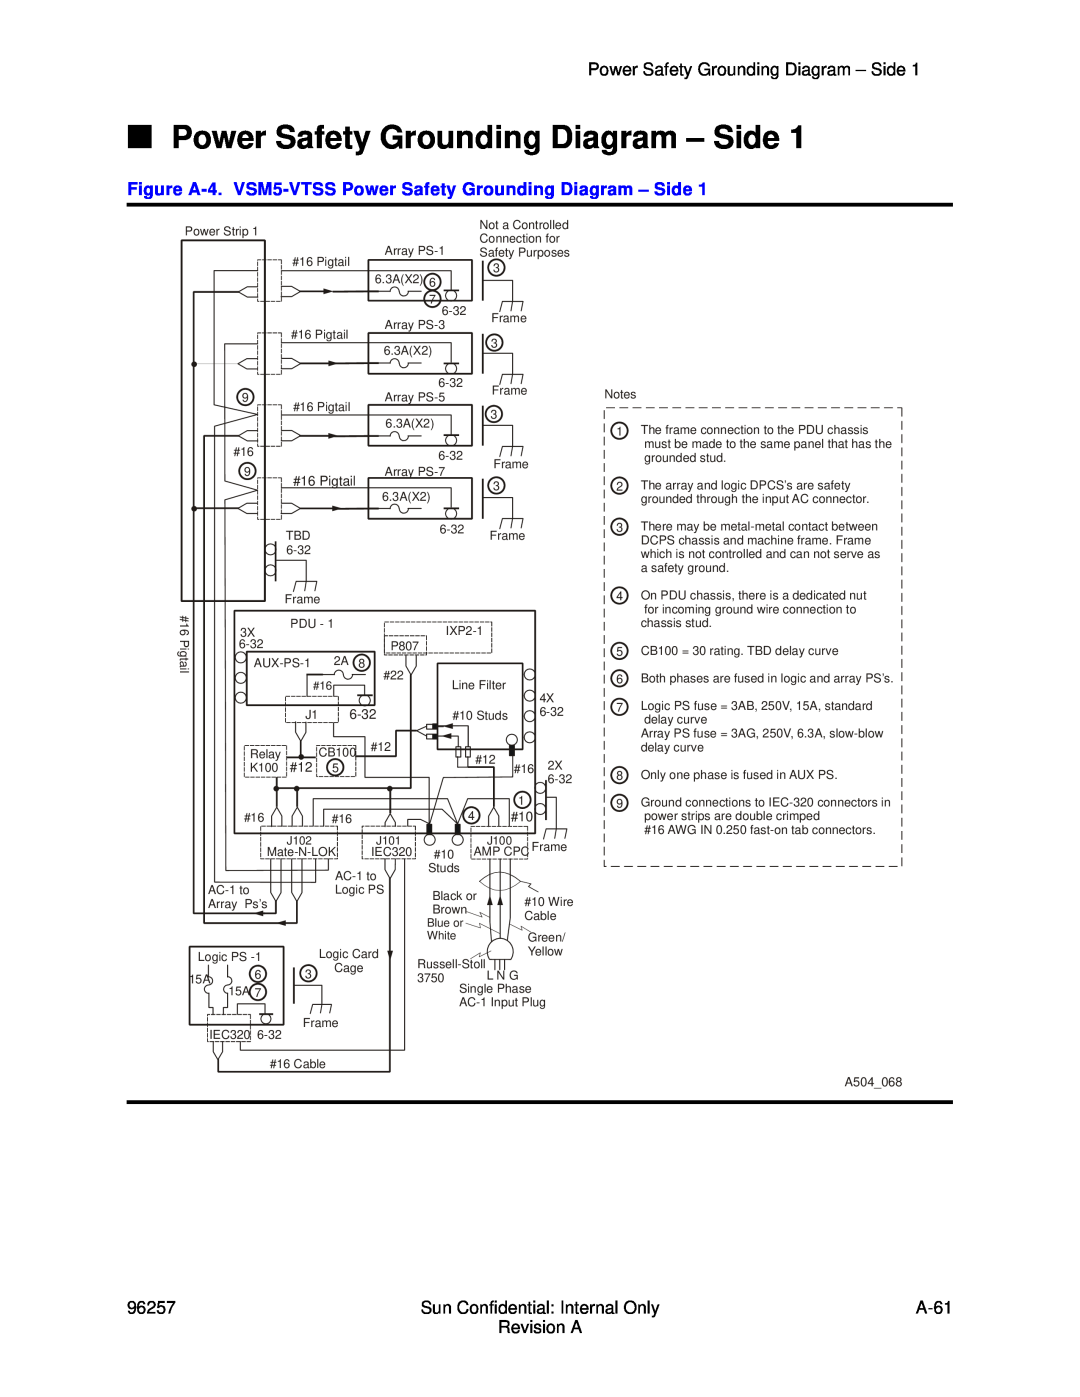 Sun Microsystems 96257 manual Figure A-4. VSM5-VTSS Power Safety Grounding Diagram - Side, #16 Pigtail, 6-32, A504068 